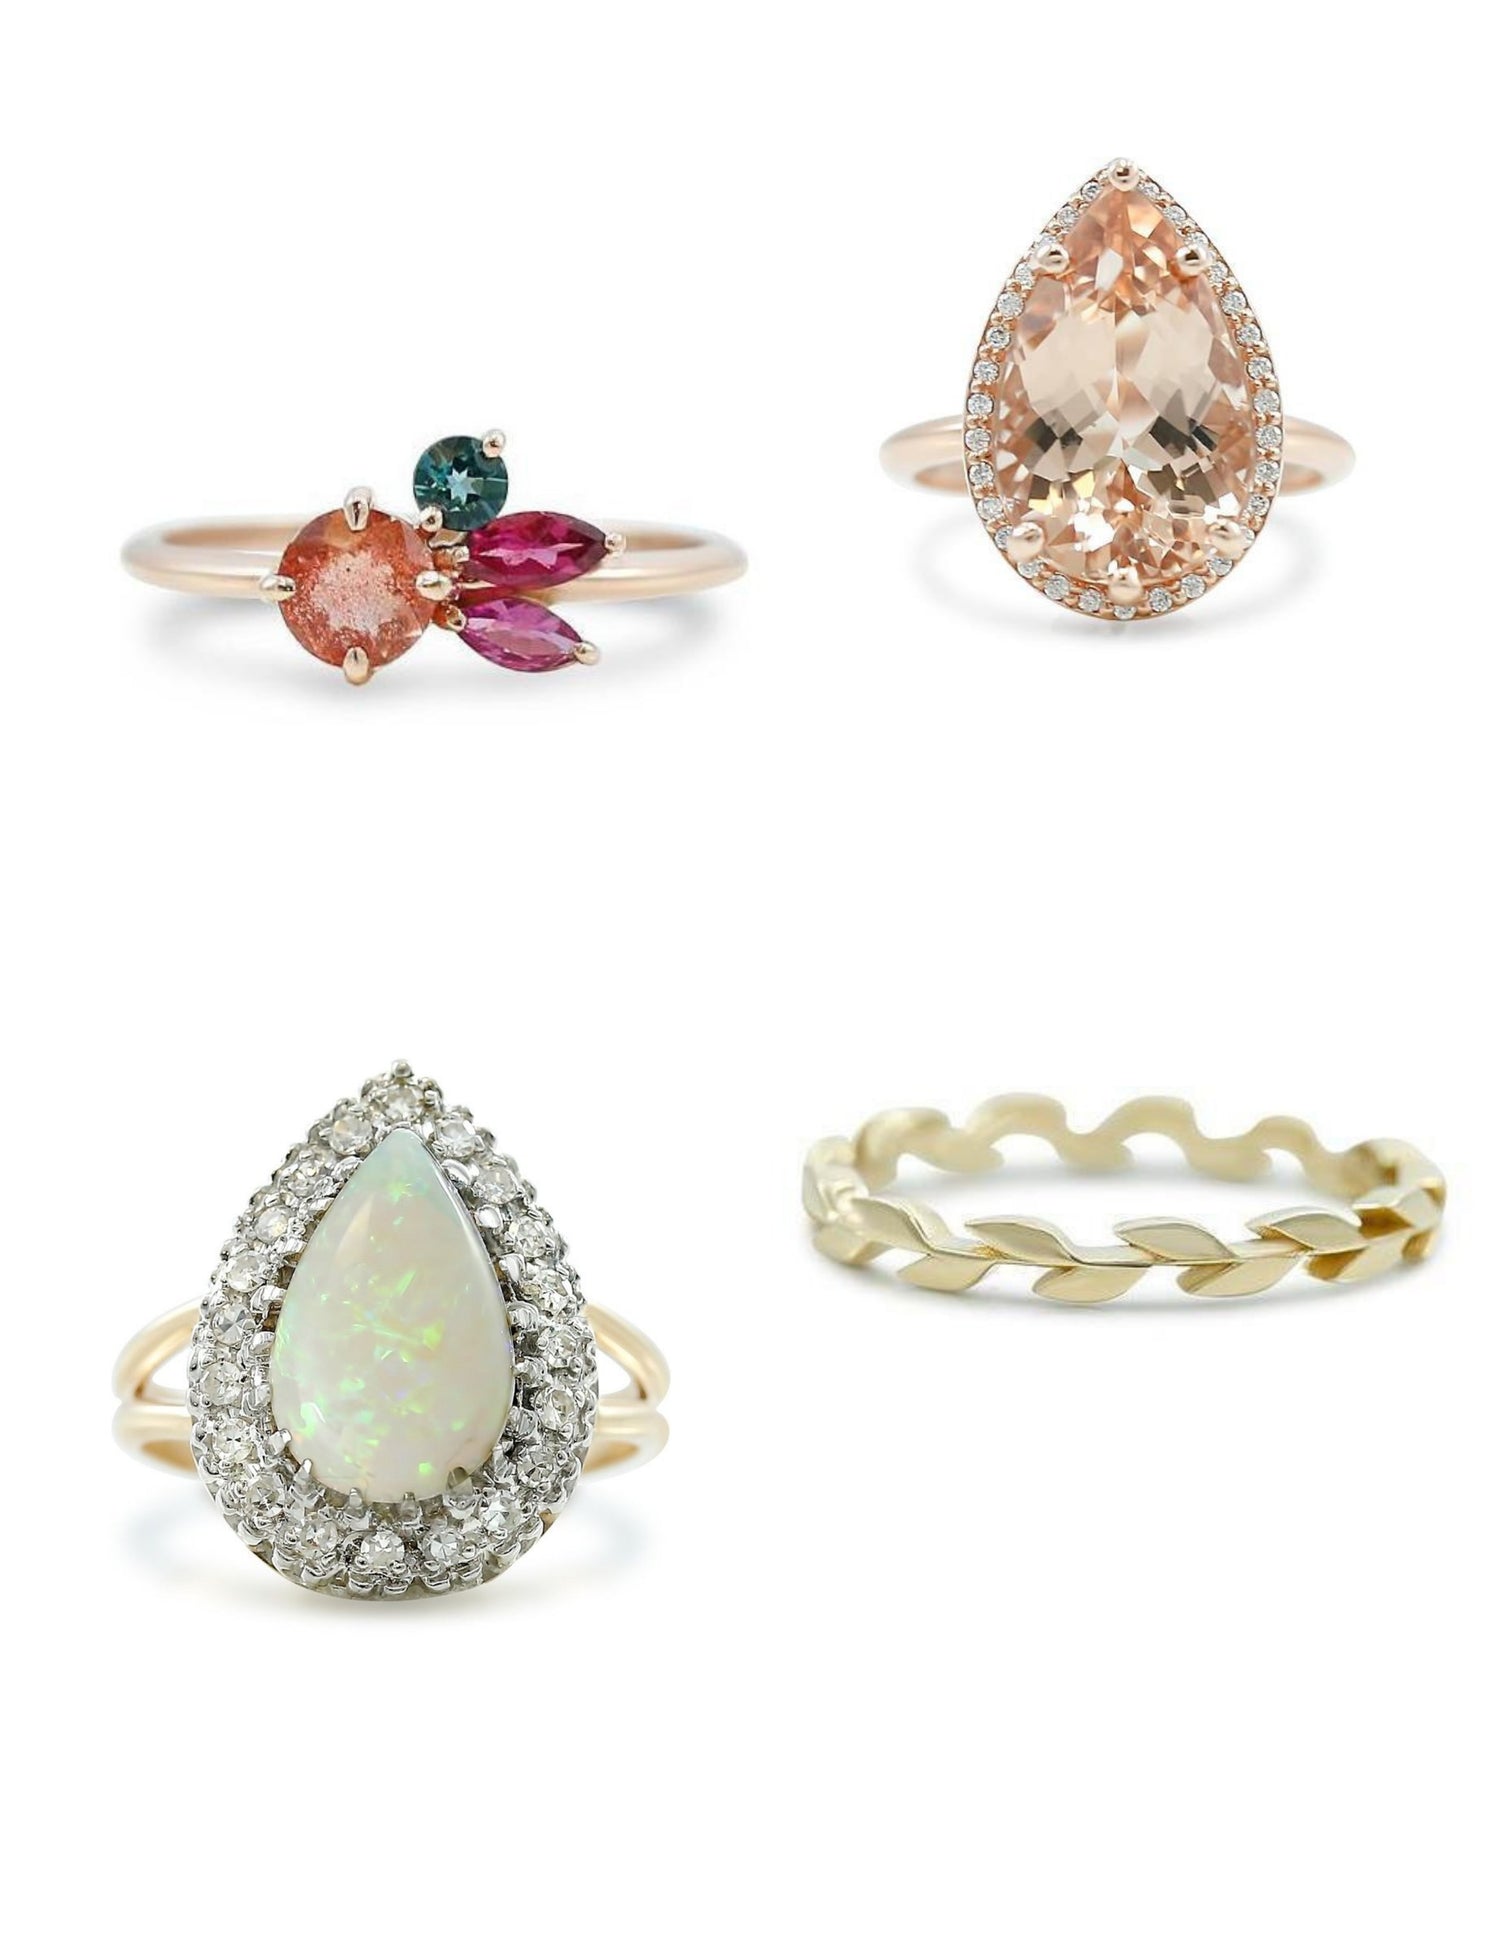 Which L. Priori Jewelry Ring is for you? | Philadelphia Jeweler Has Rings For Sale in Studio and Online